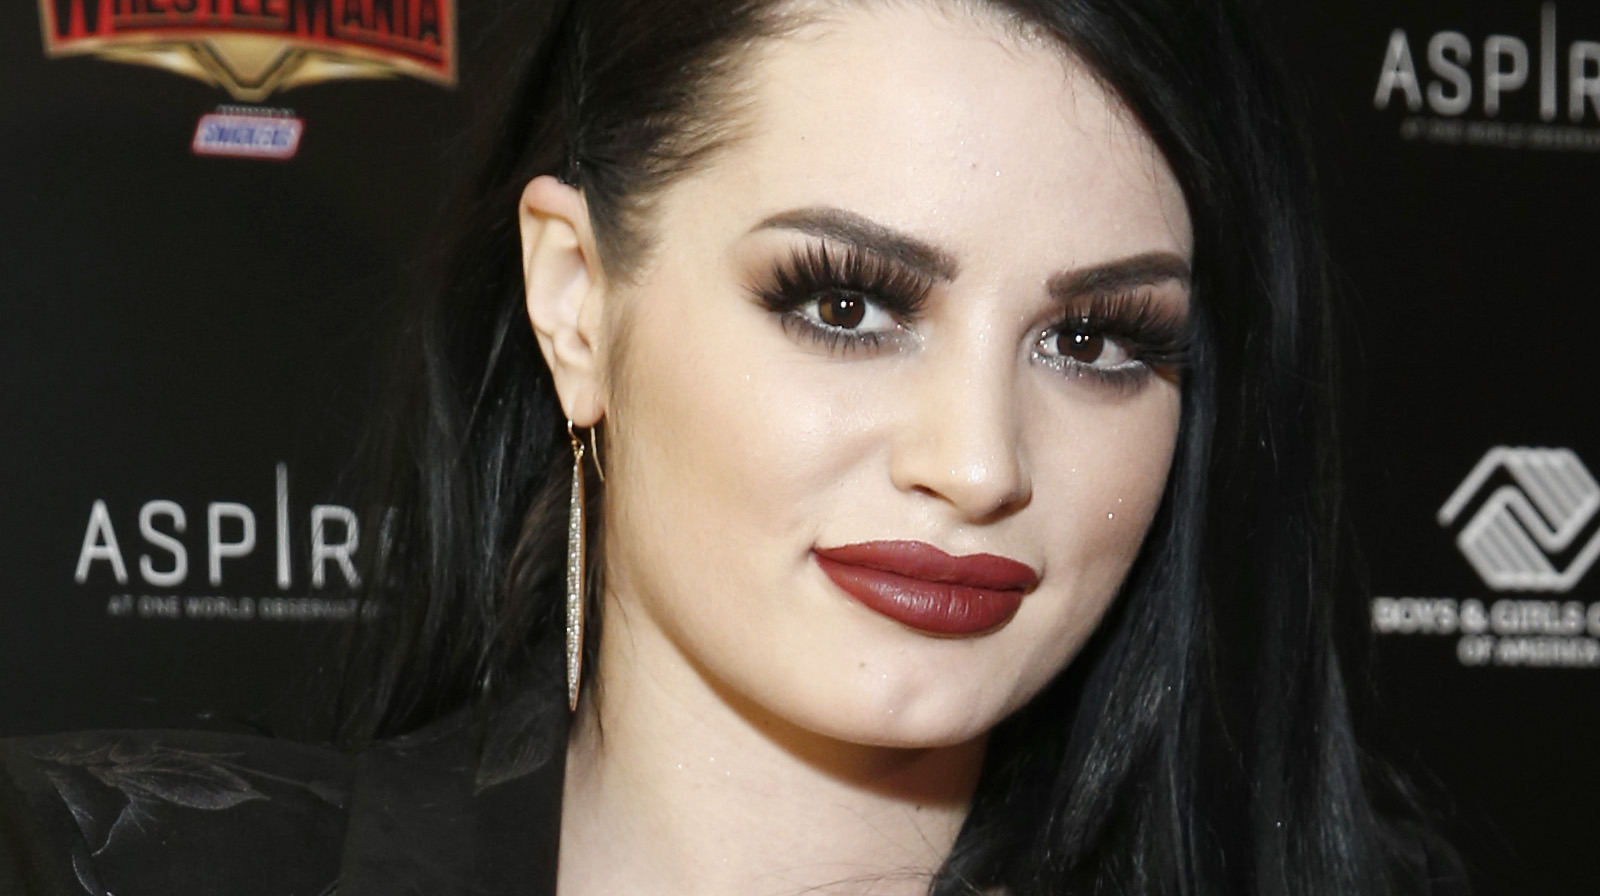 Behind The Scenes News Regarding Aew And Wwe S Interest In Paige